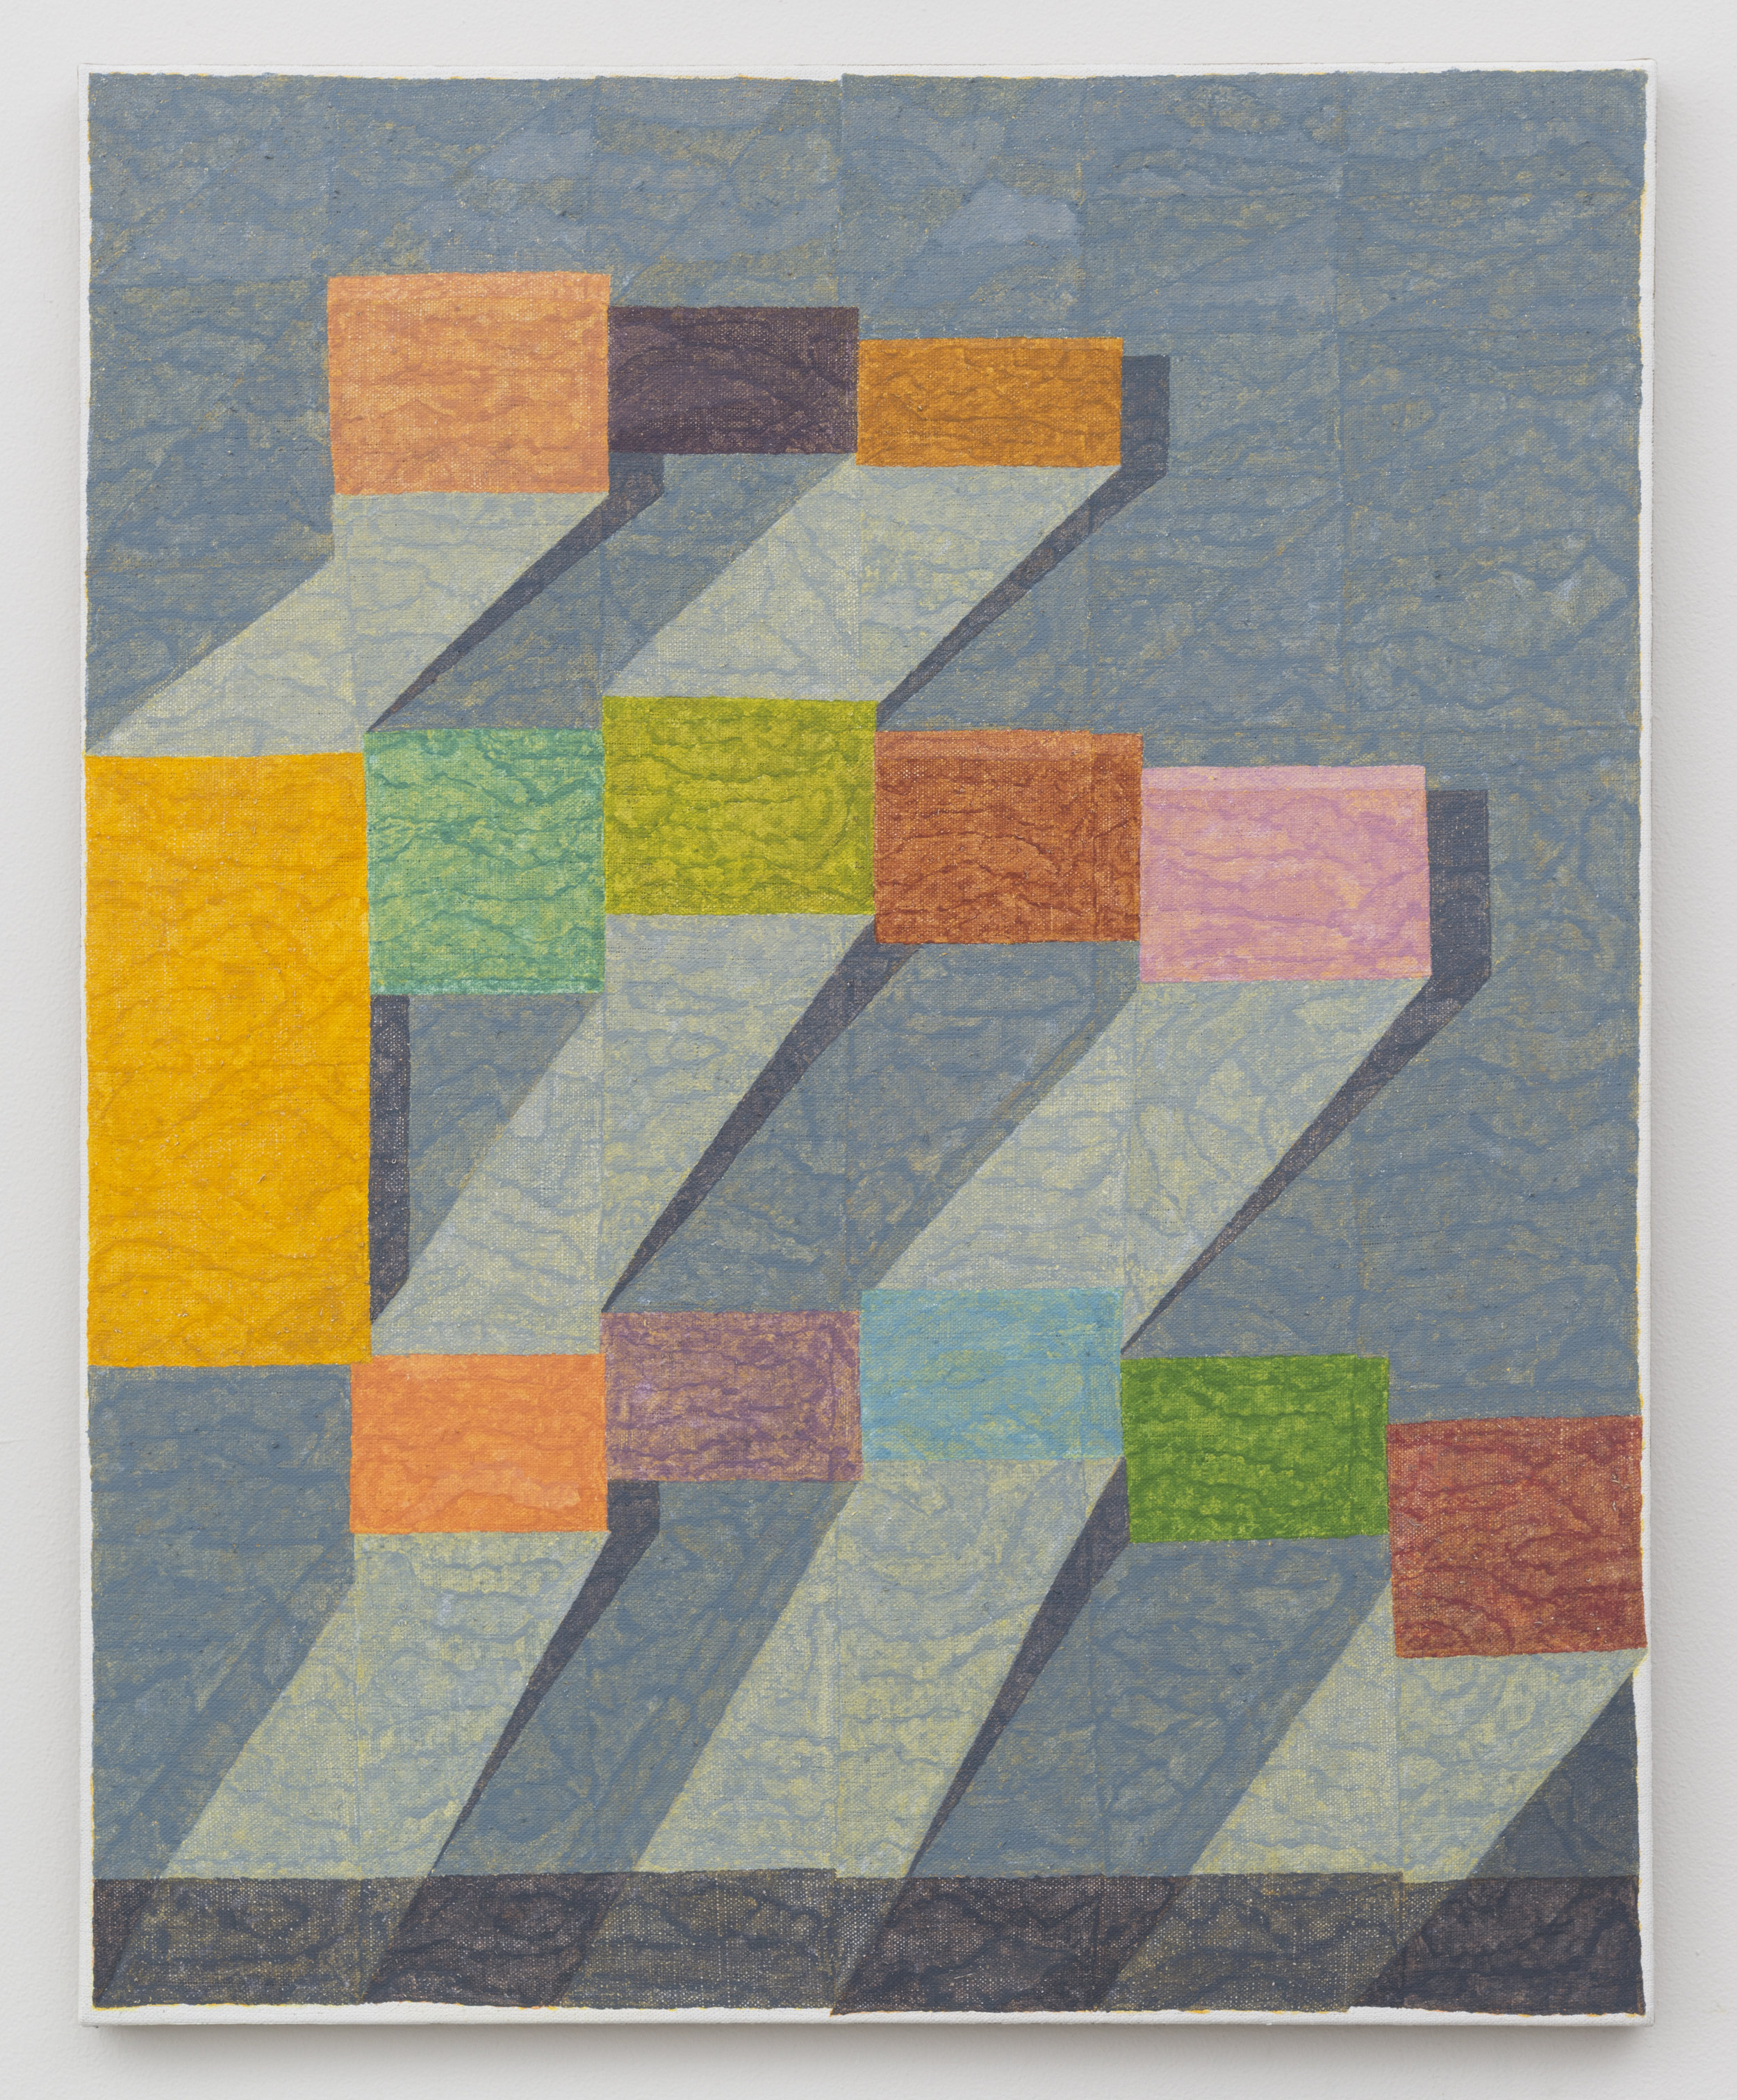  Bricklayer’s Union  Silica and Pigment on Linen 30in x 24in 2017 